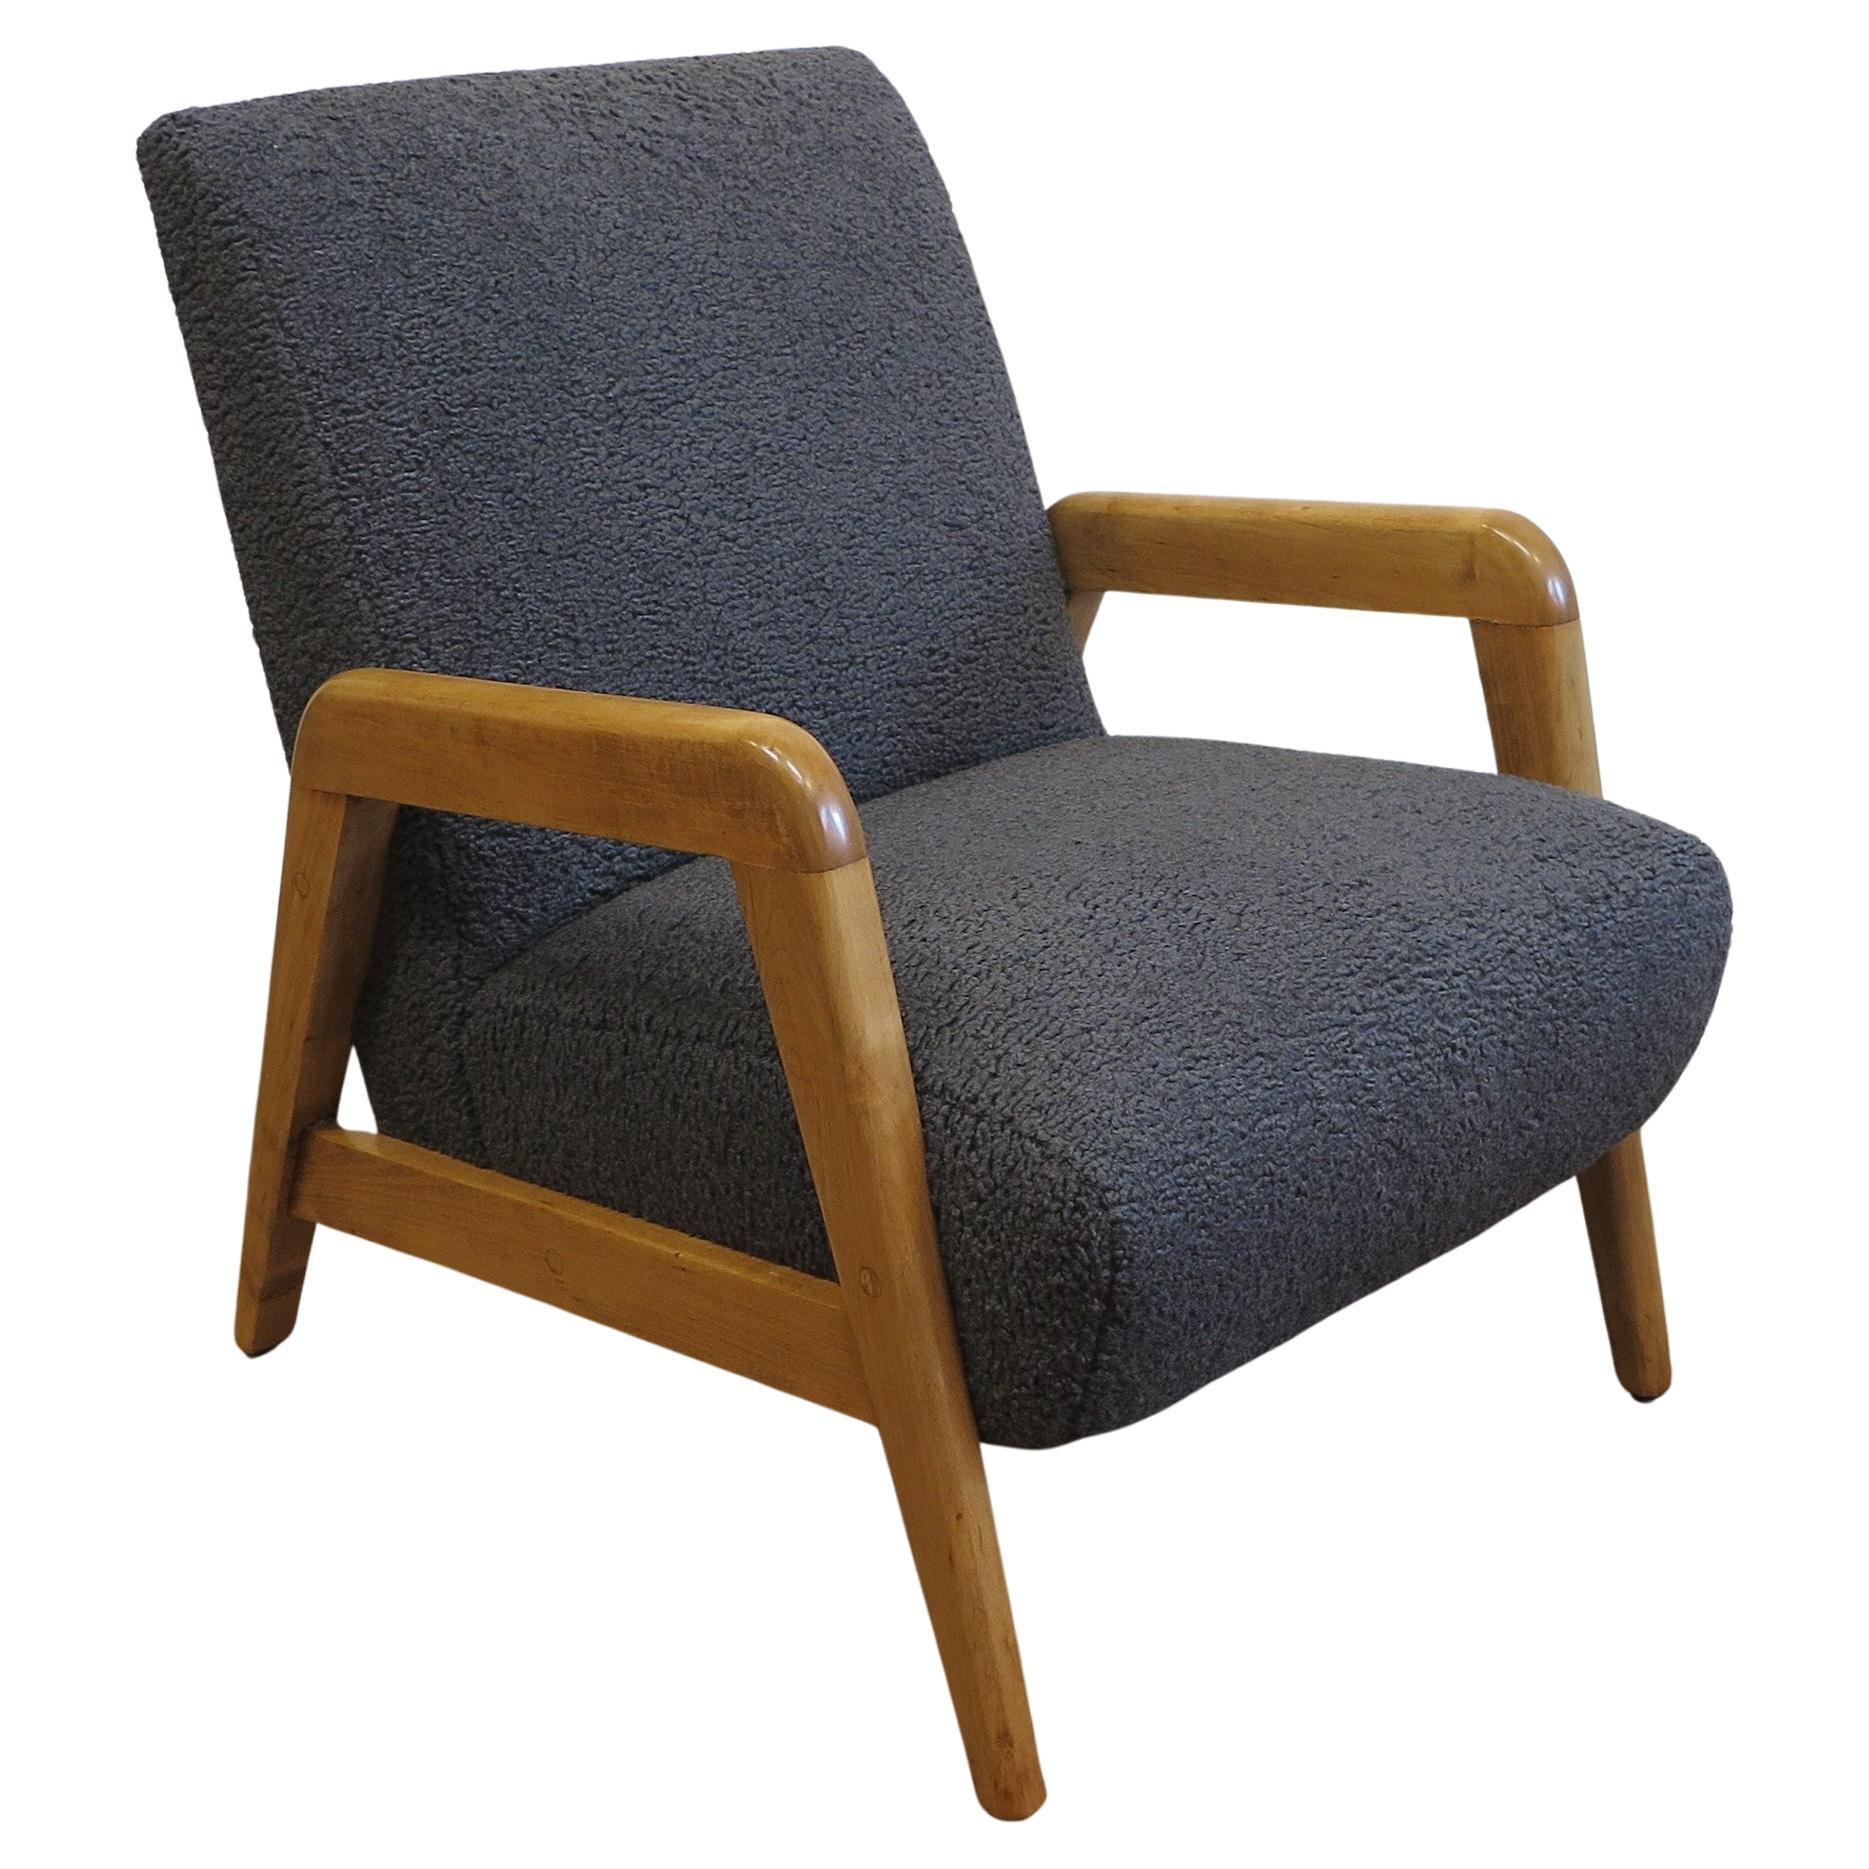 Russel Wright lounge chair for Thonet. Iconic American mid century lounge Chair designed by Russel Wright produced by Thonet. Solid maple wood frame legs, well built spring bound wooden carriage body with foam cushioning and faux shearling fabric,